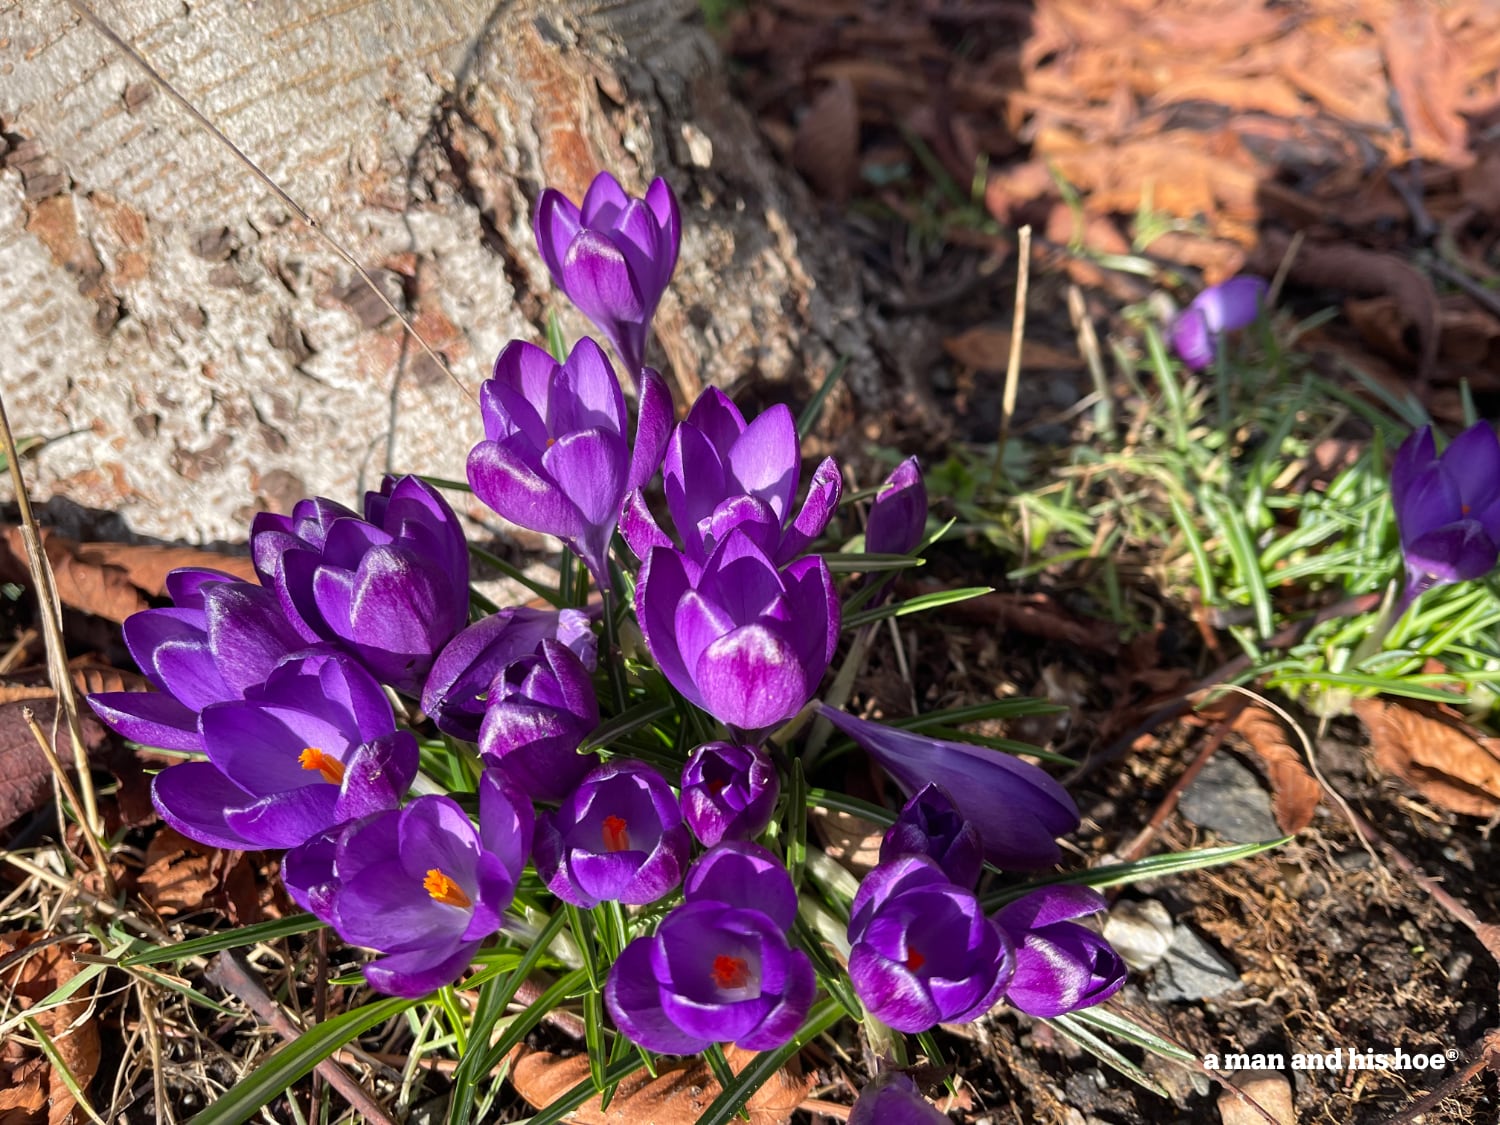 All is not lost - purple crocus are in bloom